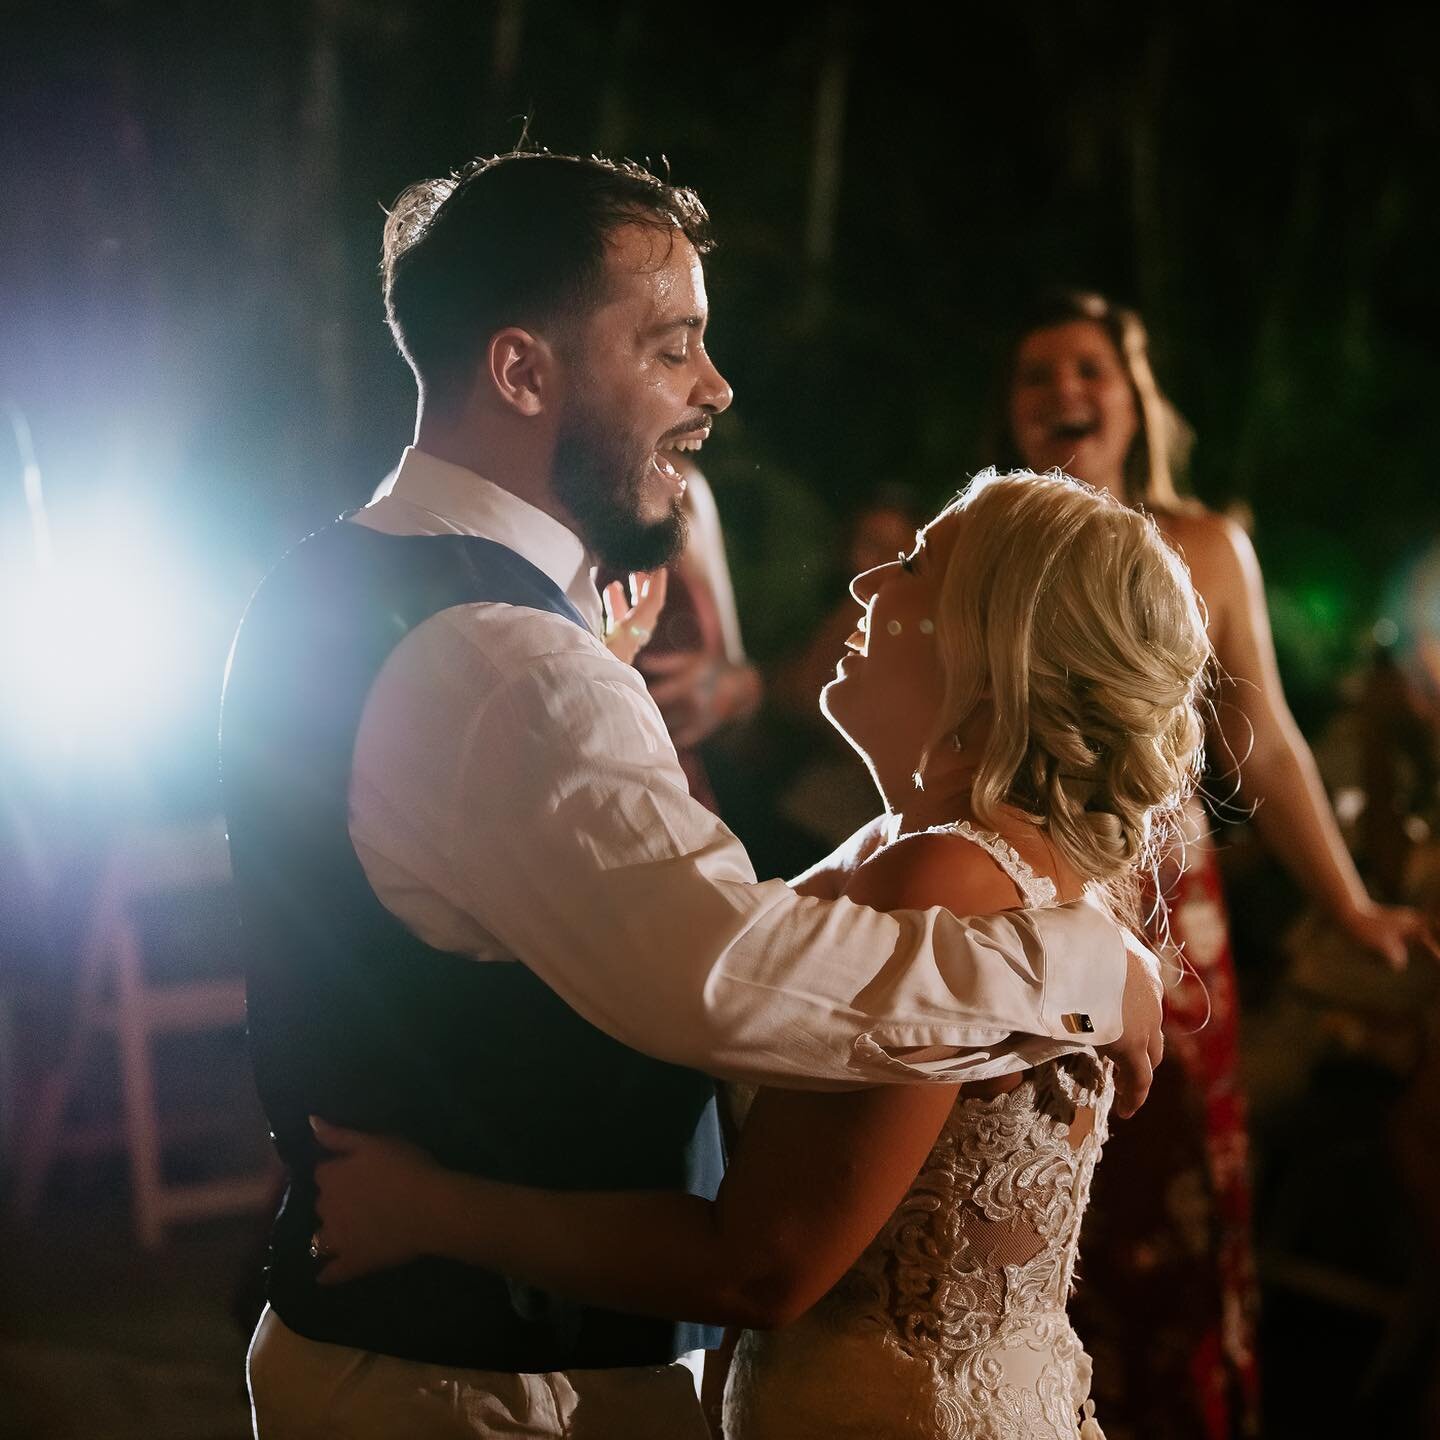 These two were so much fun. 

Bride: @mirandarubino
Groom: @mrmgr
Photography: @the_wild_eyed
Venue: @themanorslc
Videographer: @lazlo.visual
DJ: @fullhousentertainmentco
Officiant: @wedding_officiant_and_planner
Dress: @mollebridals
Groom: @menswear